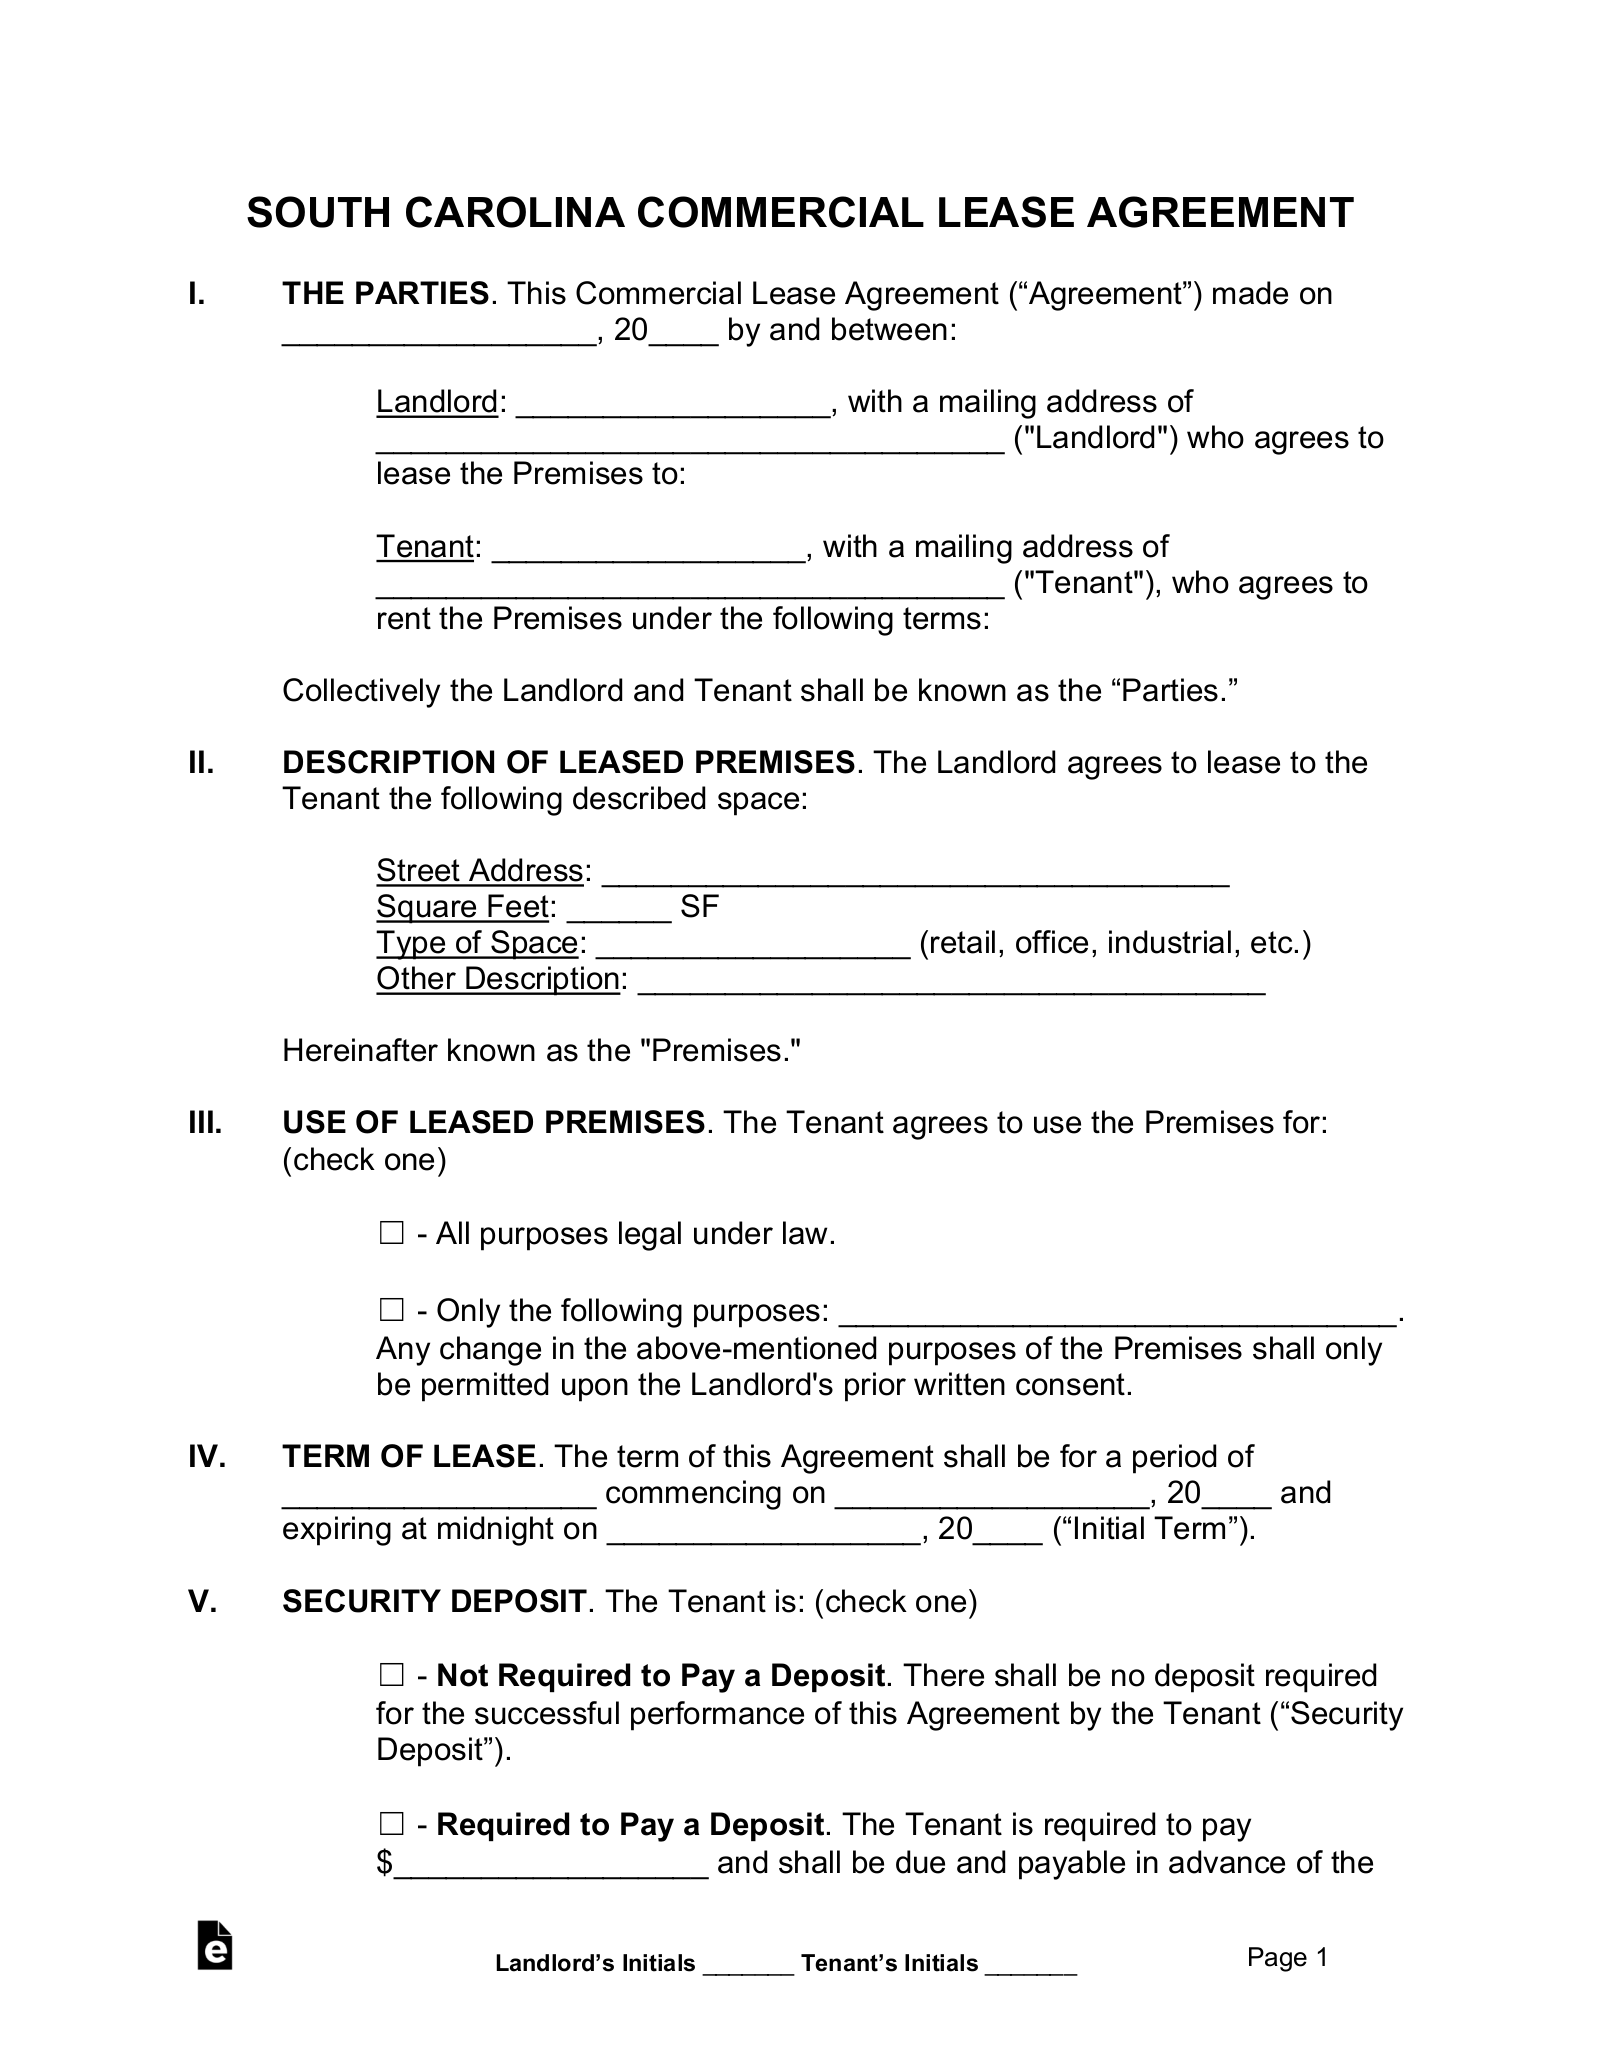 free-south-carolina-commercial-lease-agreement-pdf-word-eforms